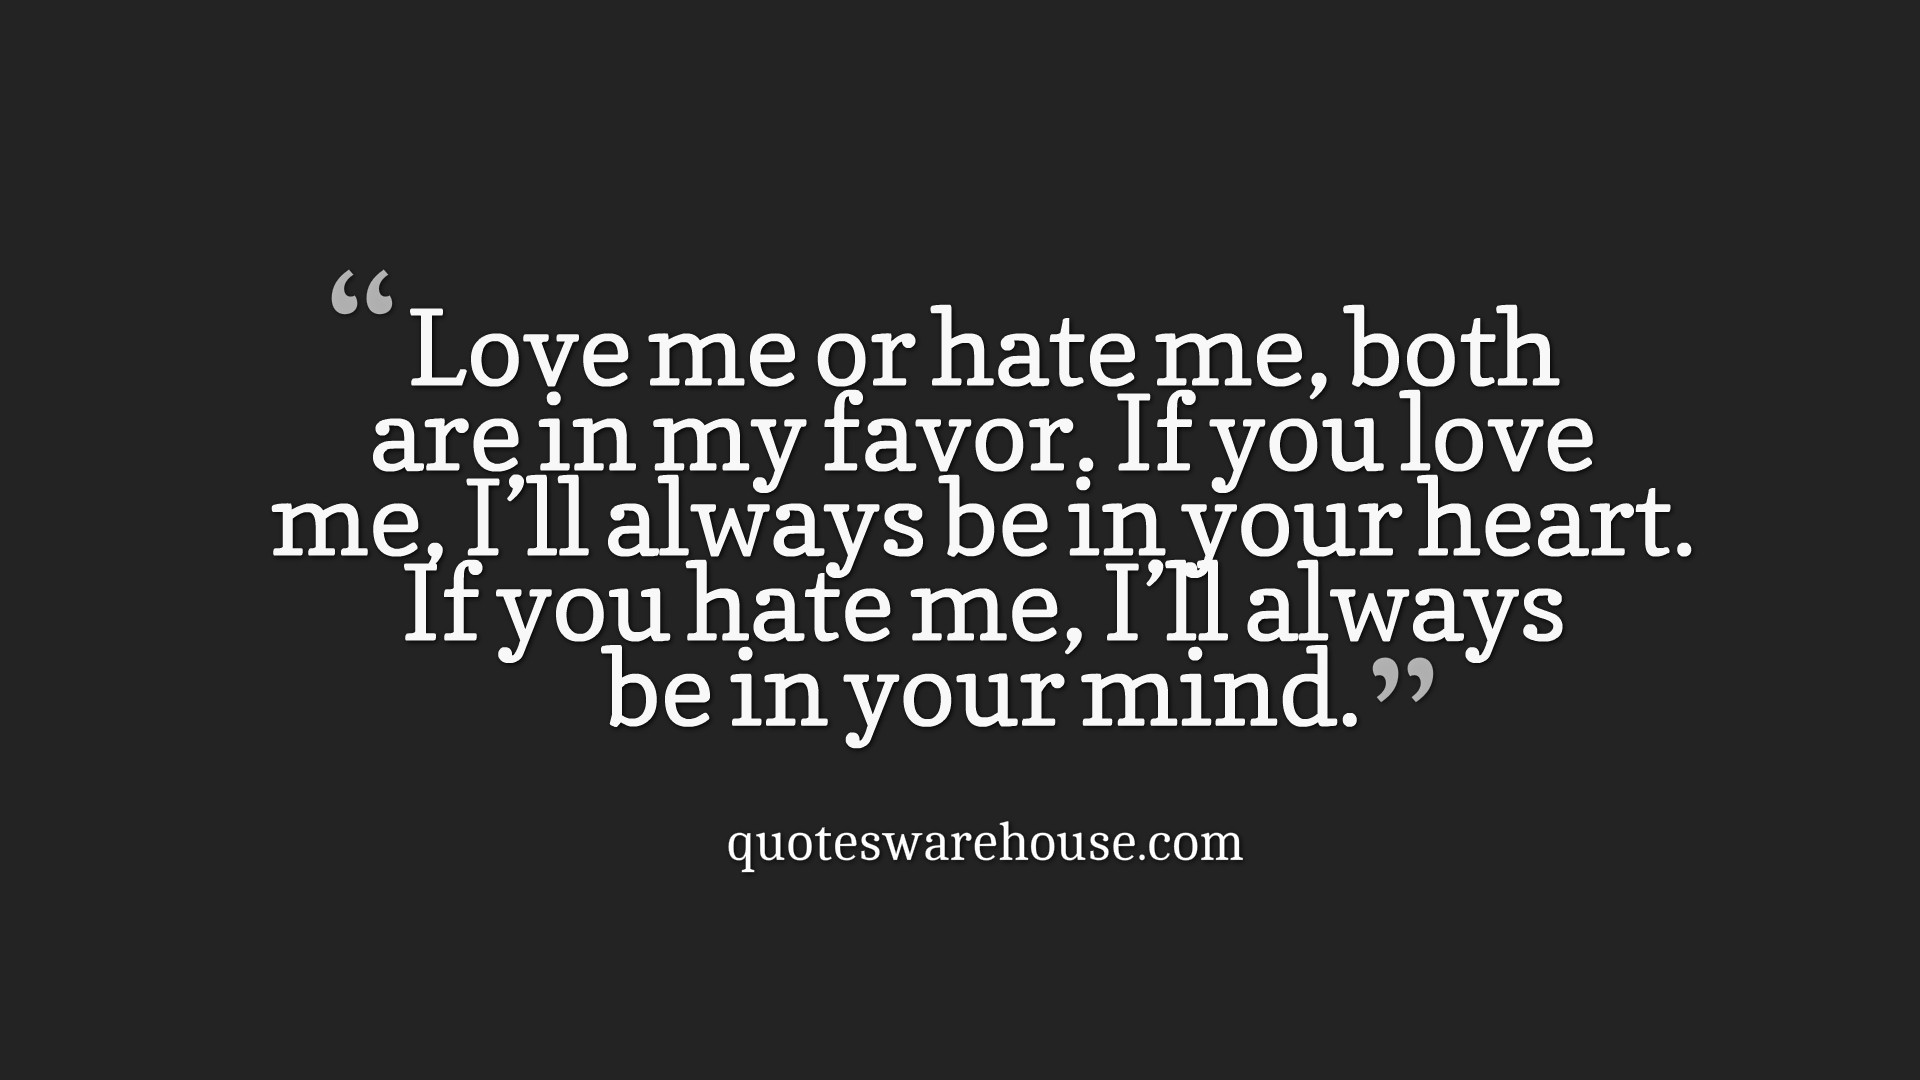 Quote About Hating Love
 Quotes about Love Me Hate Me 50 quotes